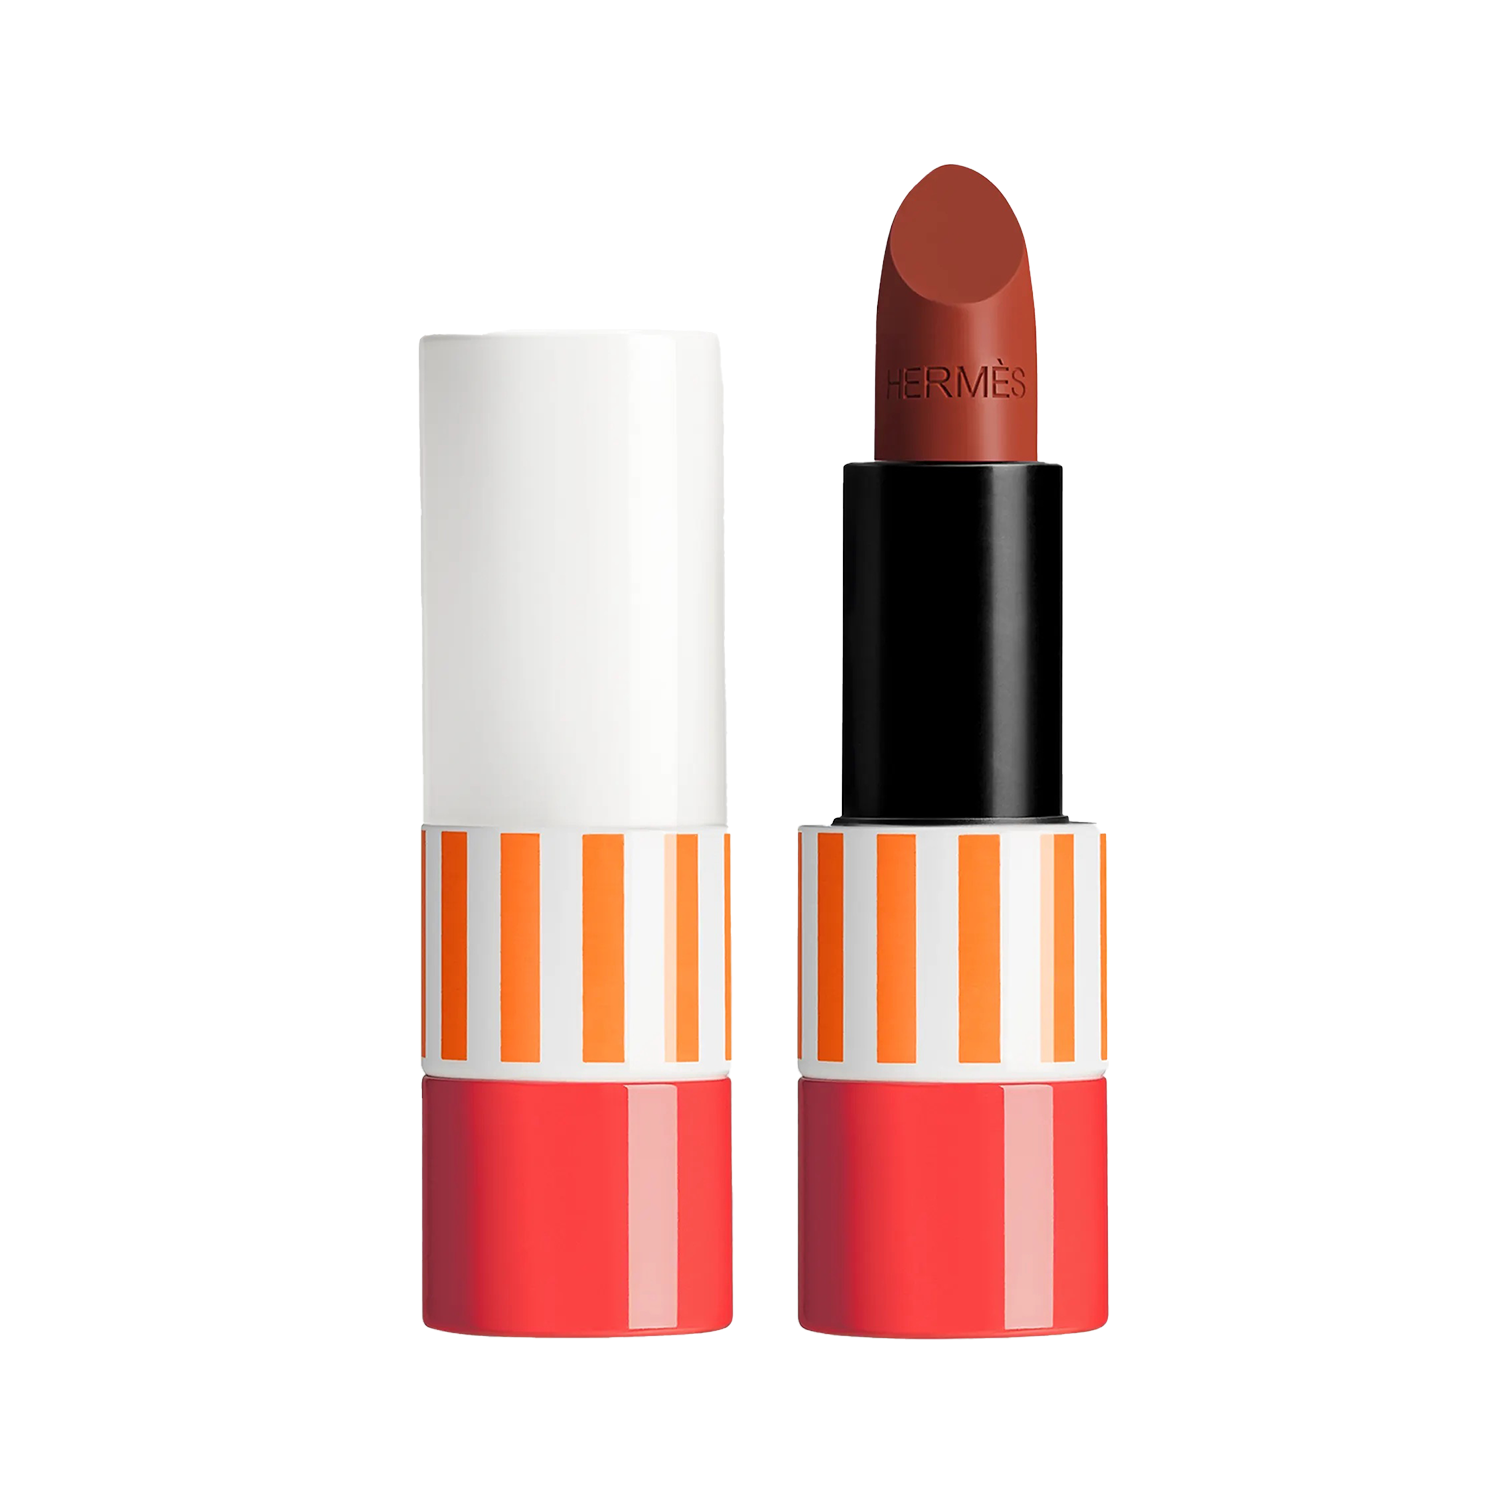 HermÃ¨s Rouge Hermes Shiny Lipstick Limited Edition